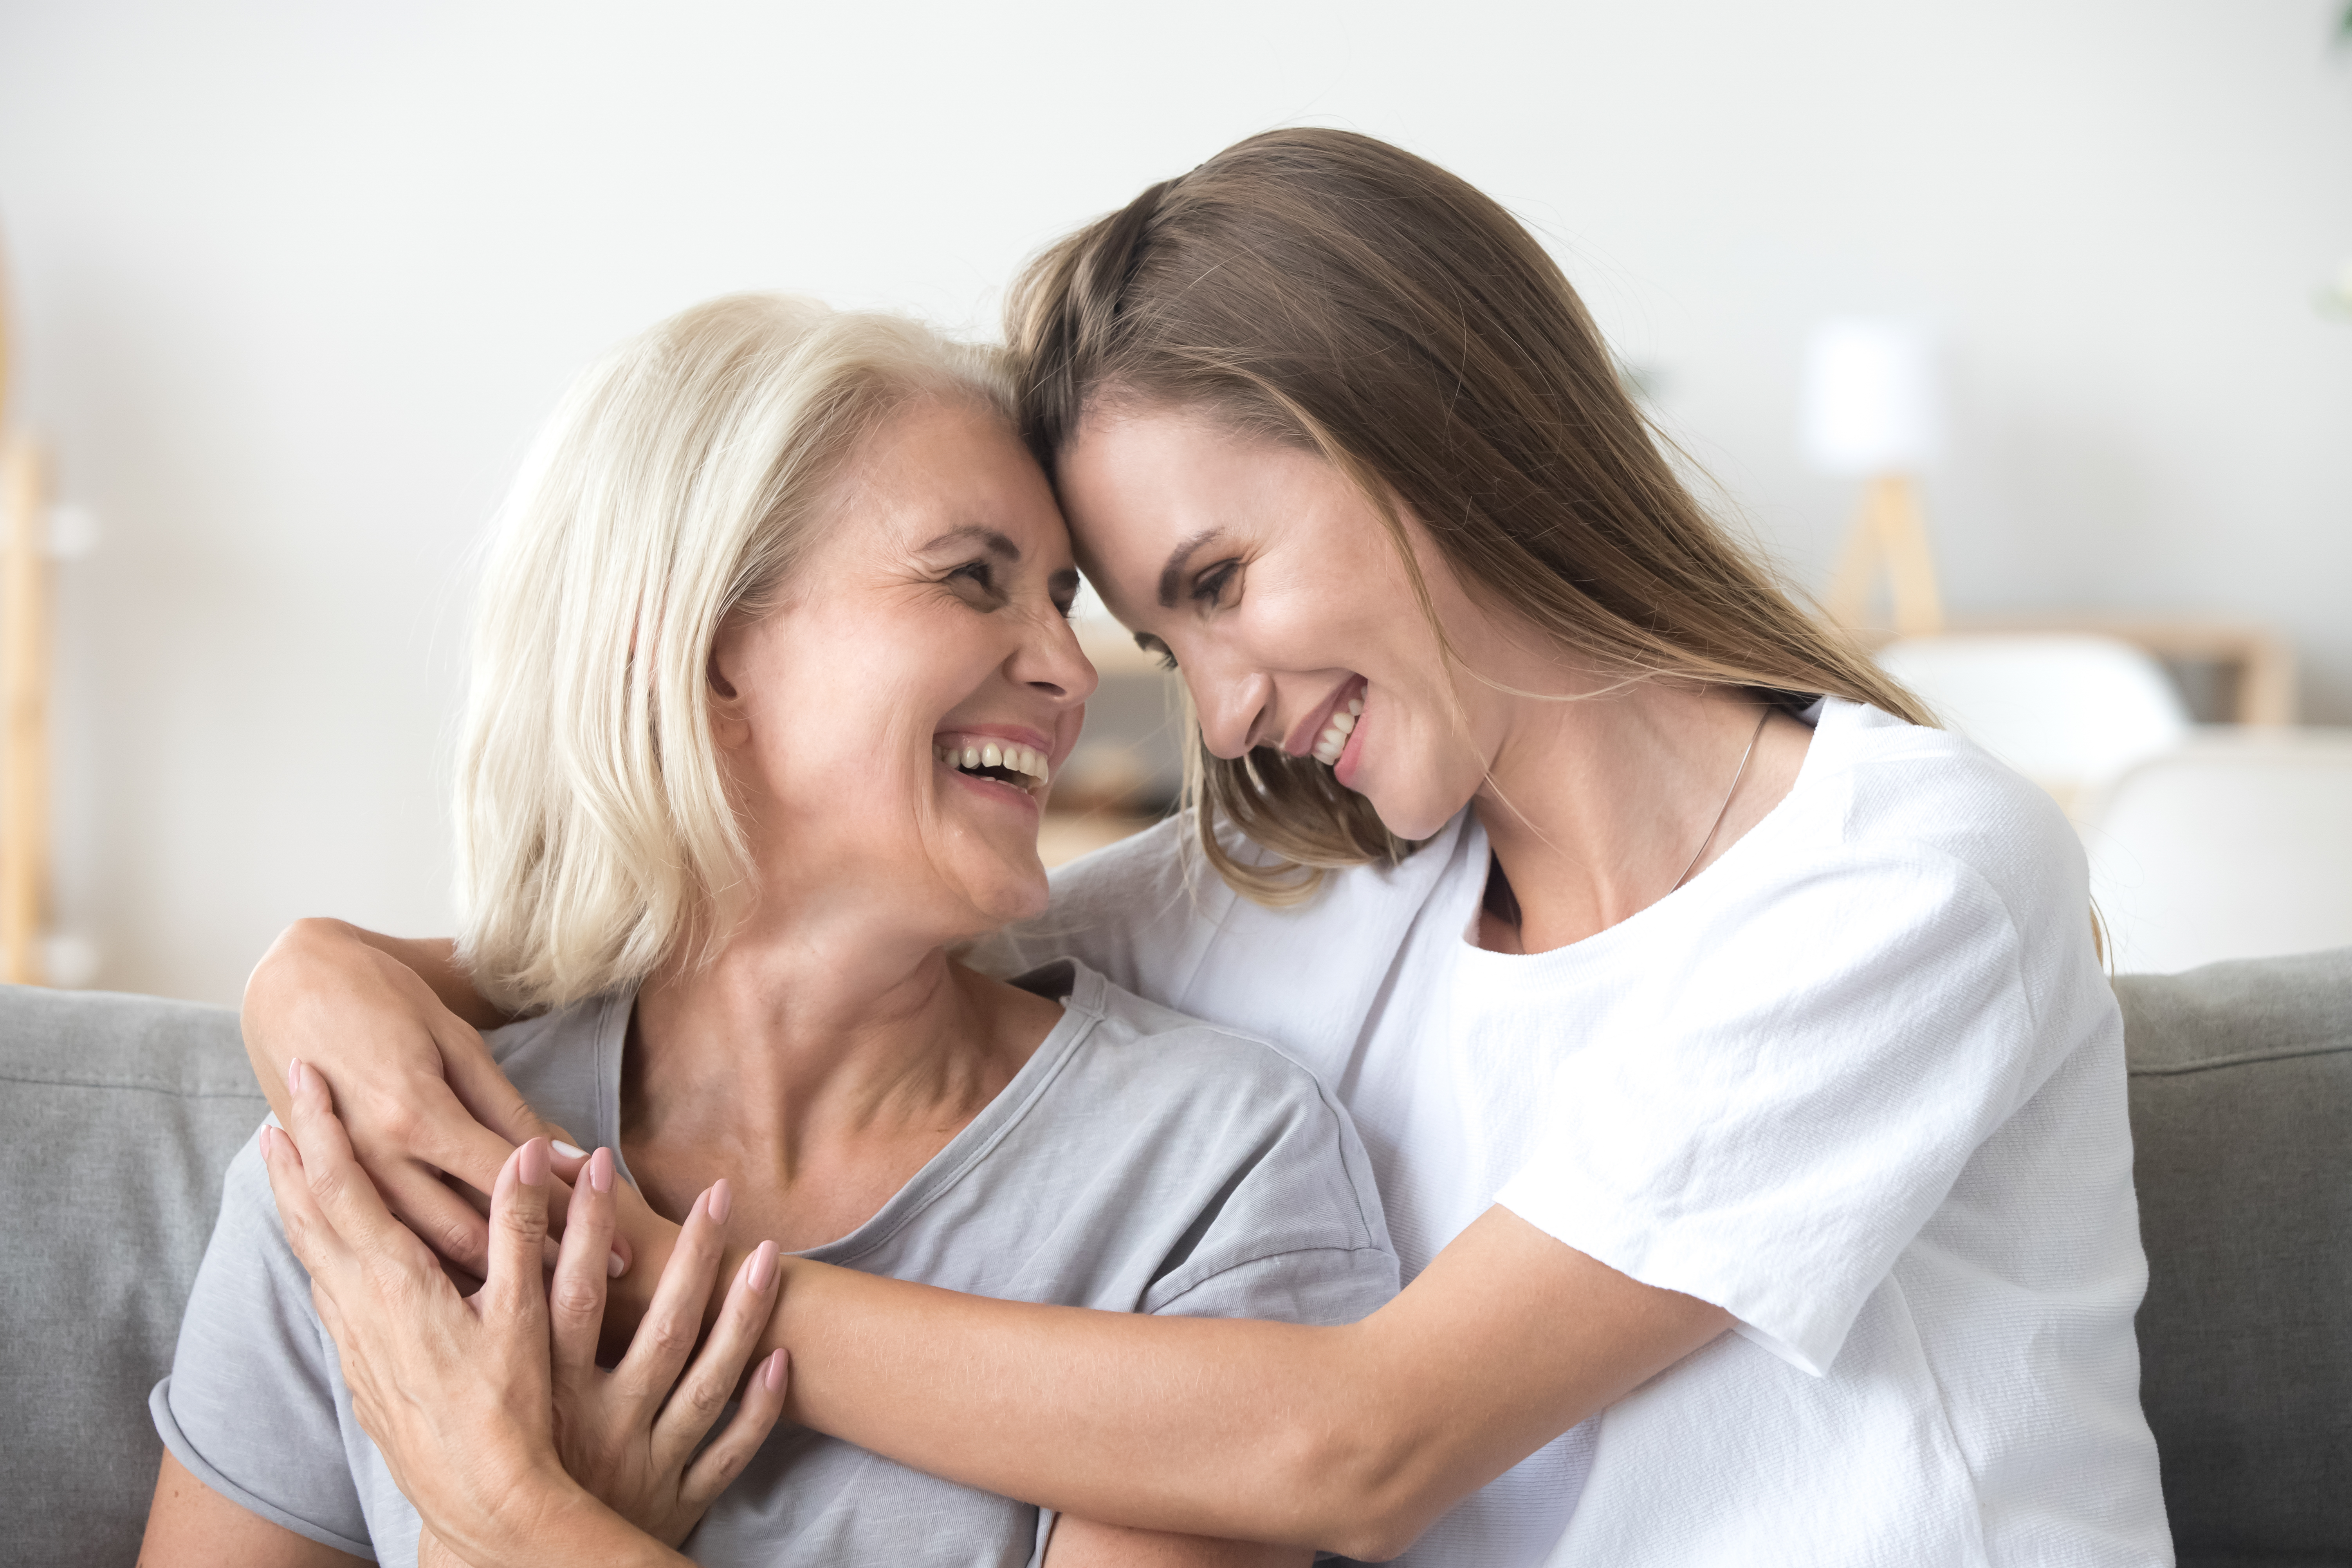 A mother and daughter hugging and smiling at each other | Source: Shutterstock